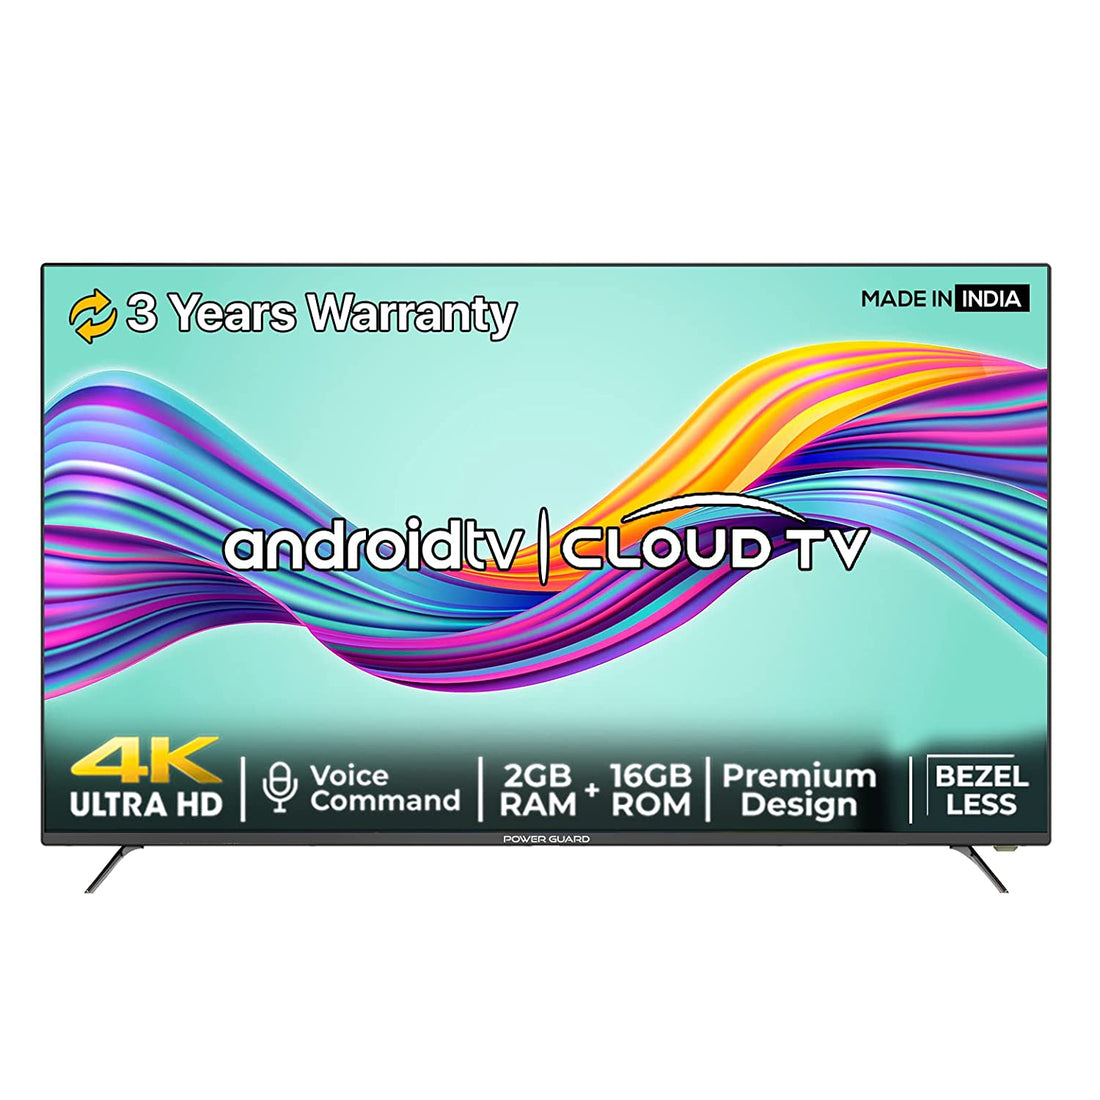  Find the Cheapest 65 inch TV in India - Great Deals Inside!